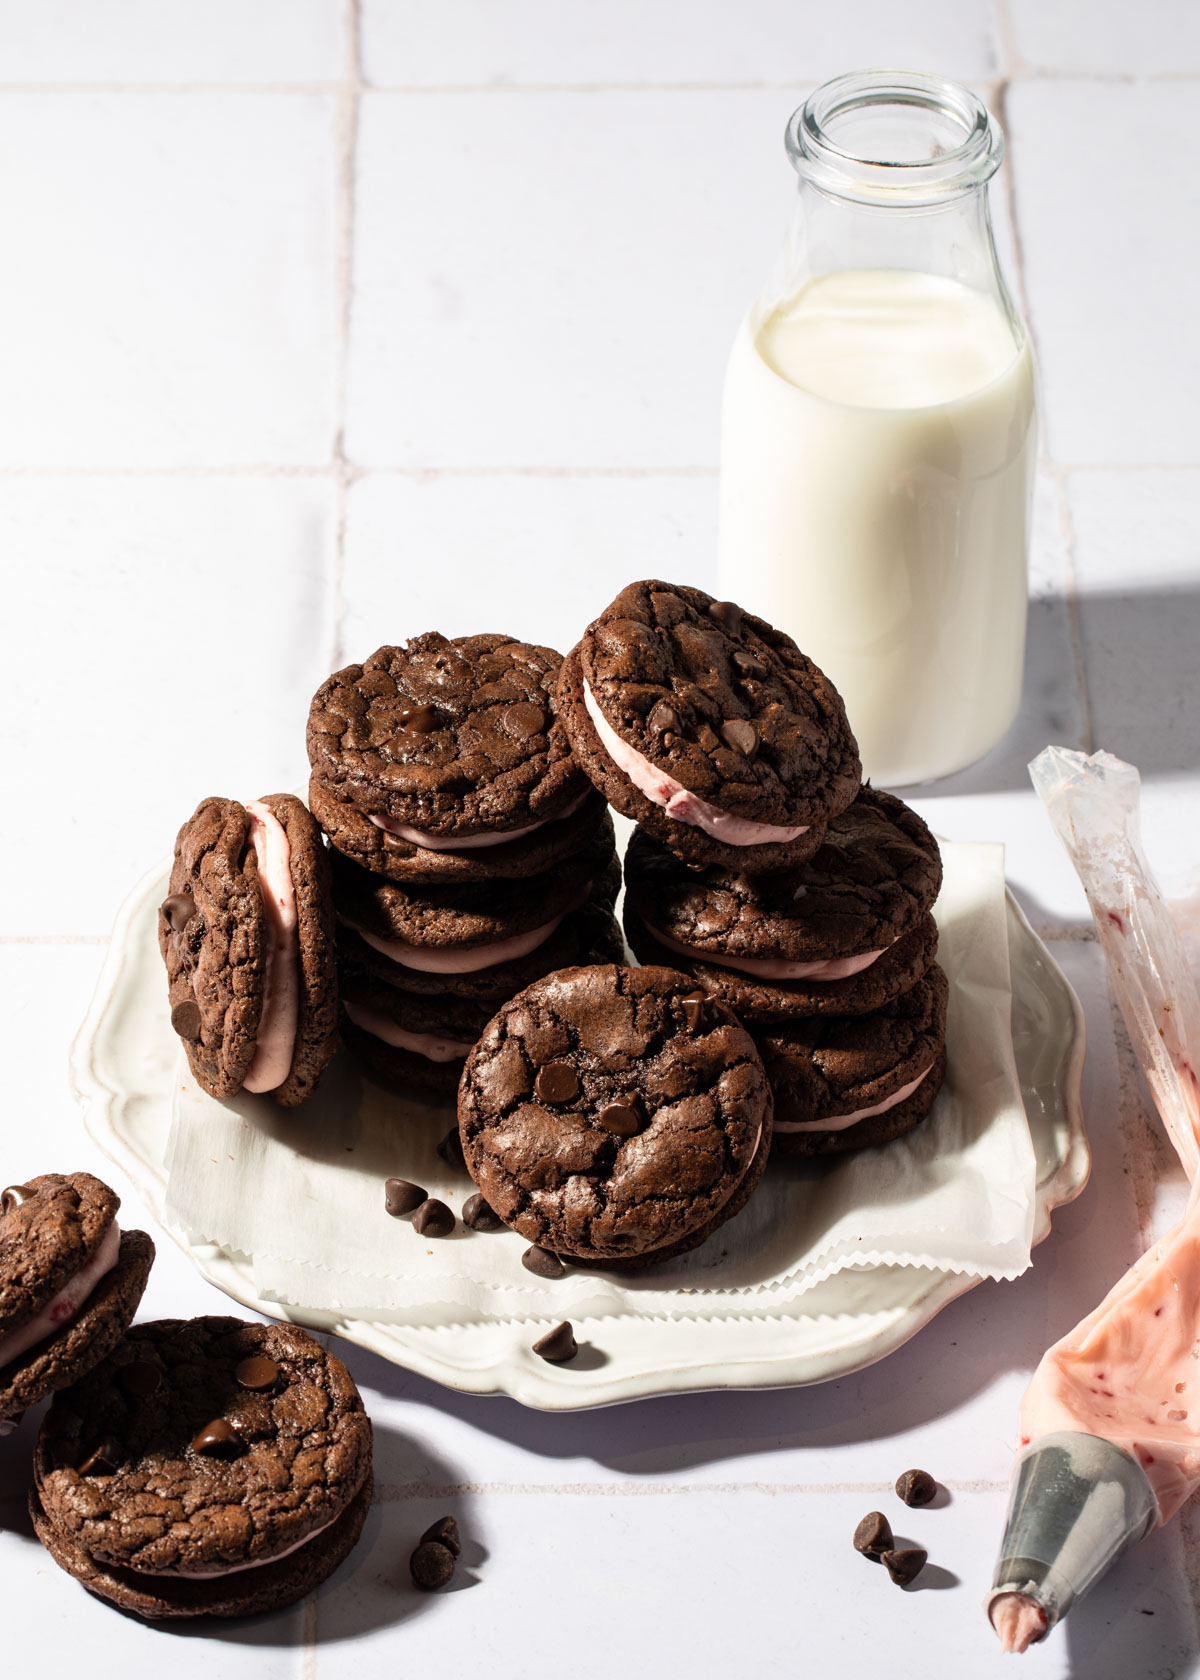 A stack of chocolate peppermint sandwich cookies